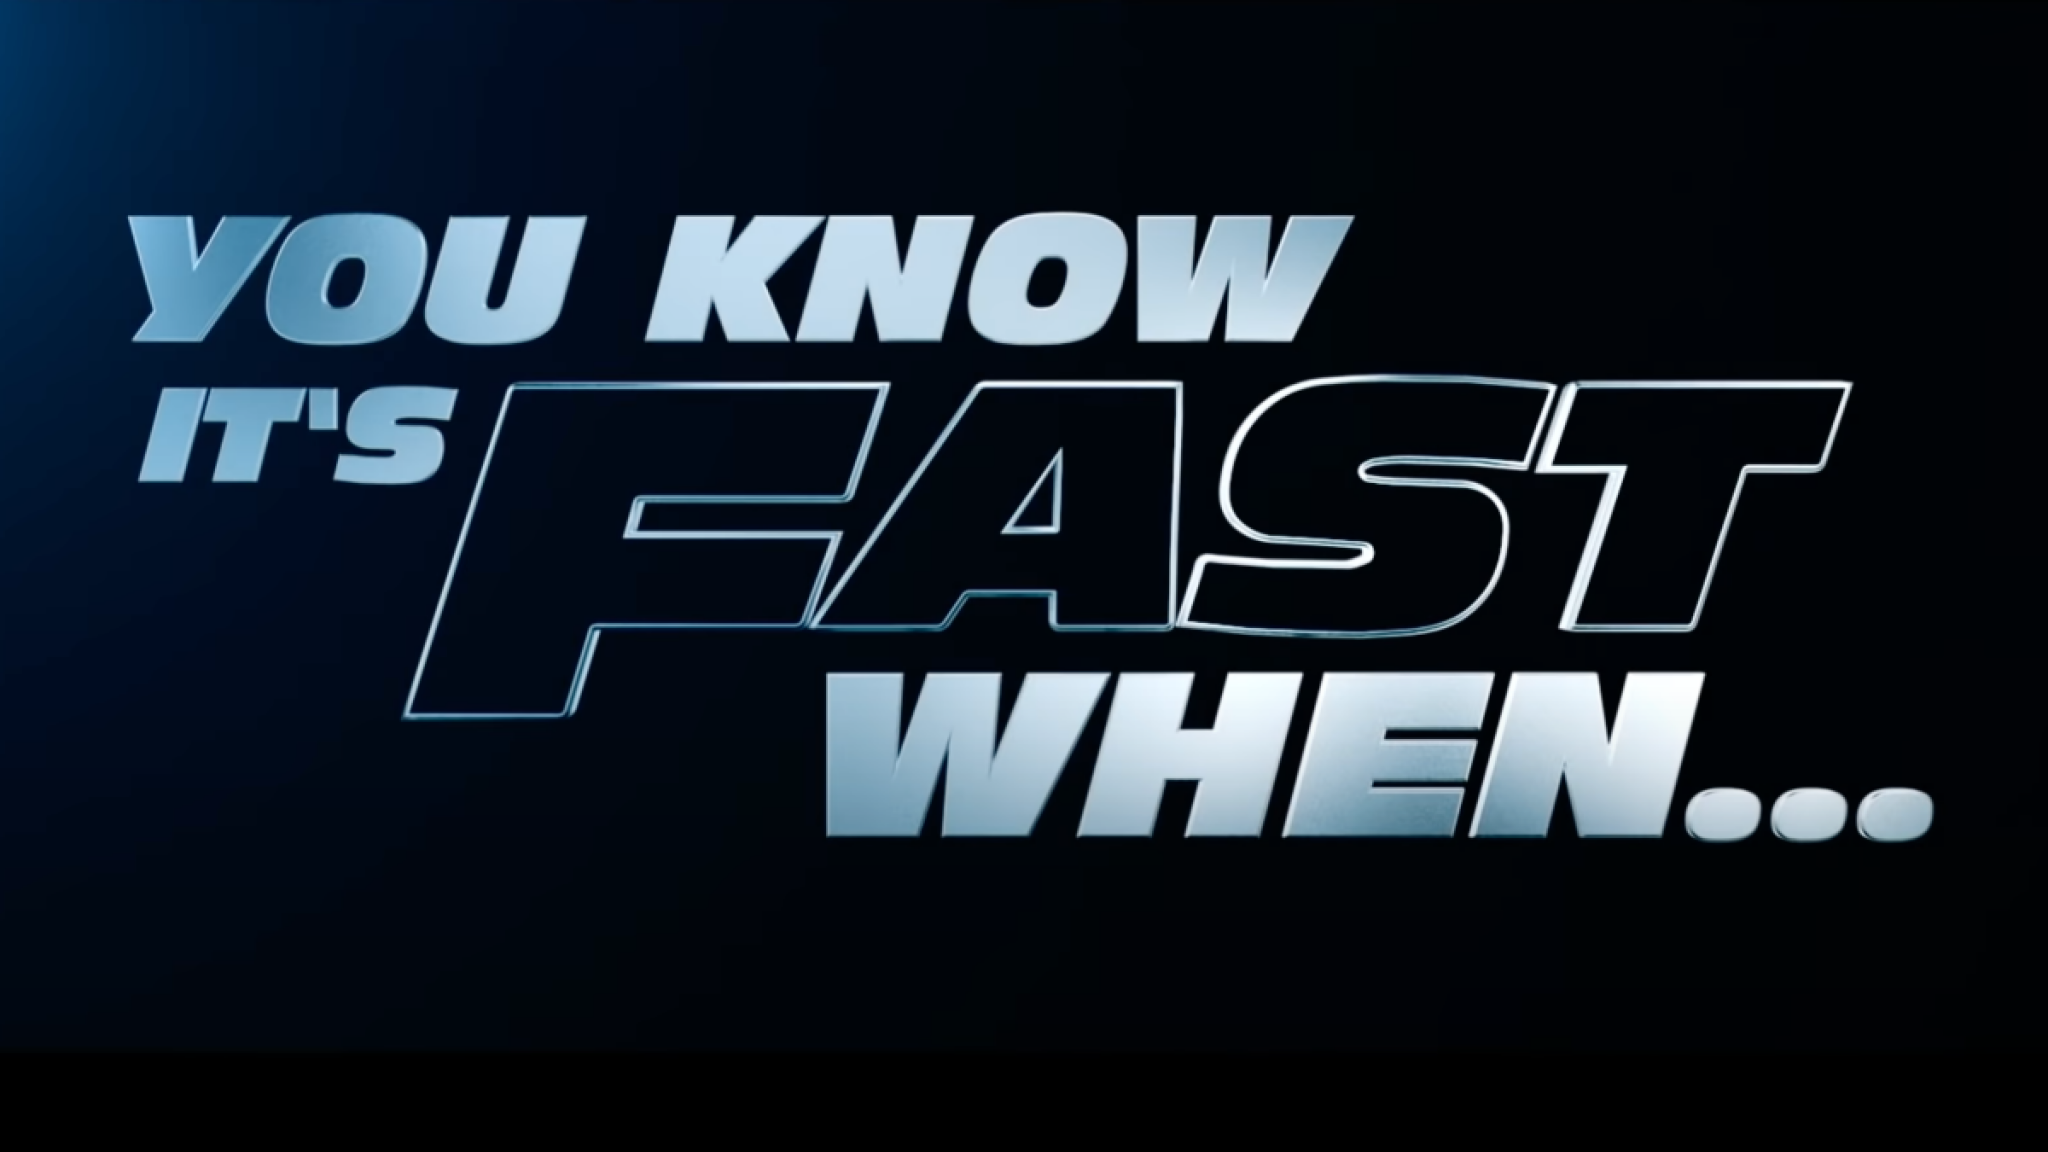 This Fast & Furious Promo Is Either Fantastic or Terrible, I Can’t Decide